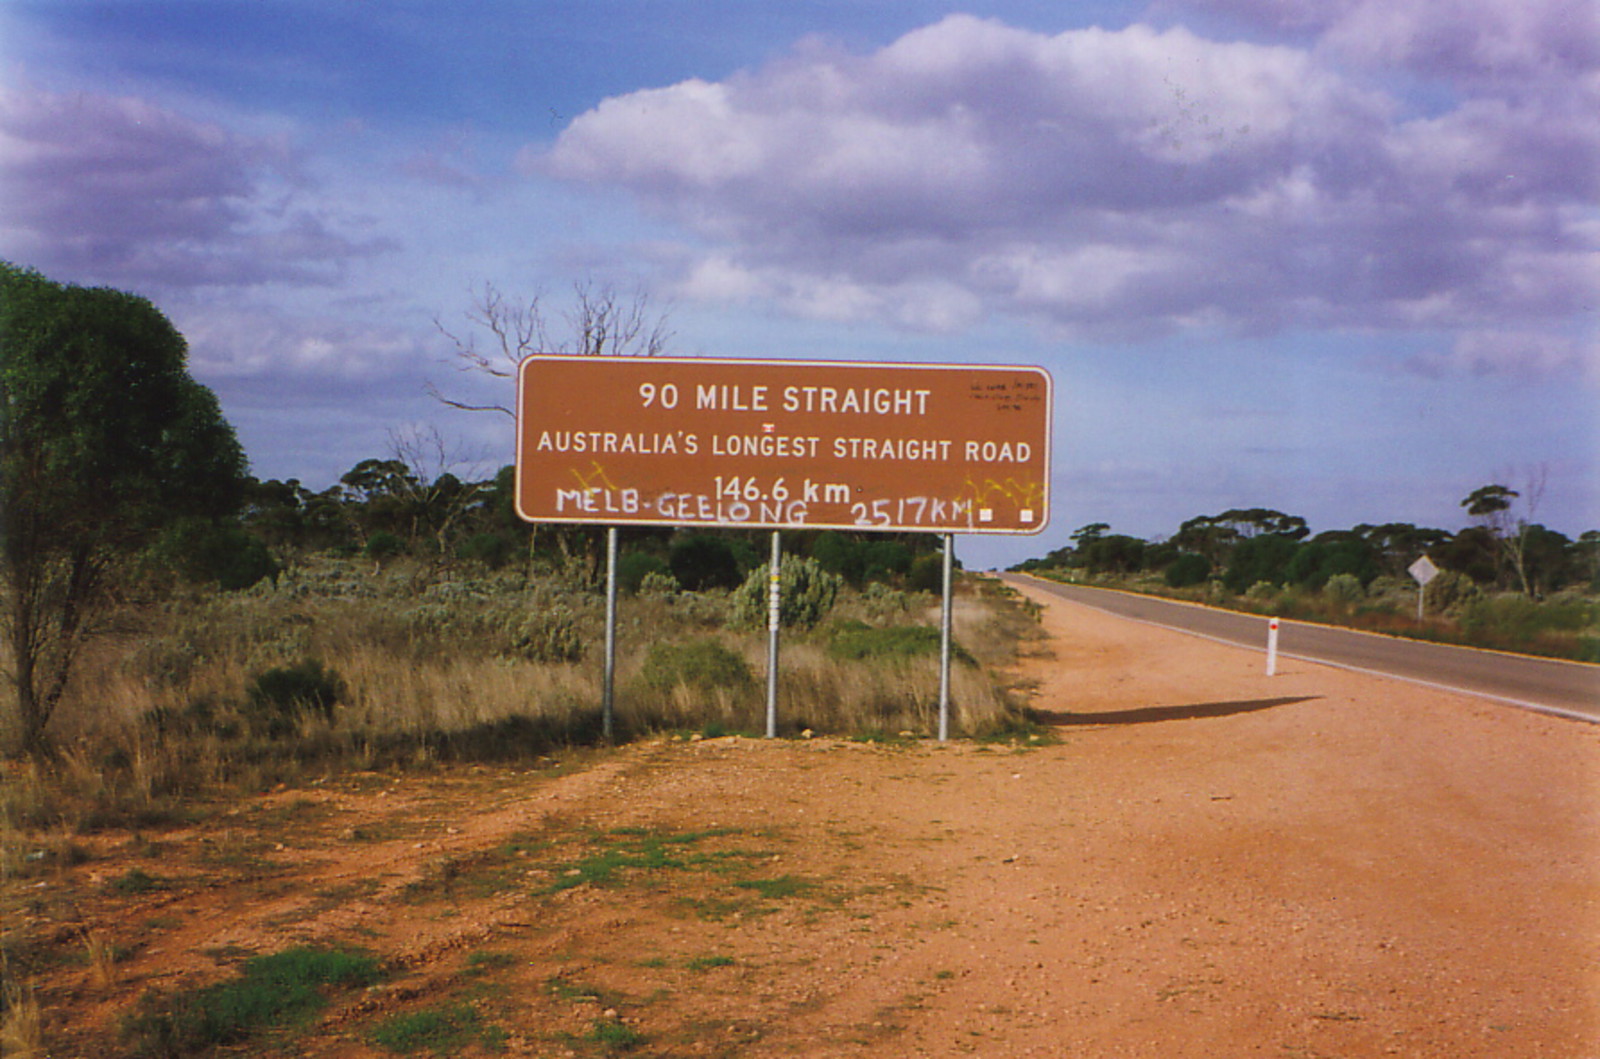 A sign proclaiming the longest stretch of straight road in Australia